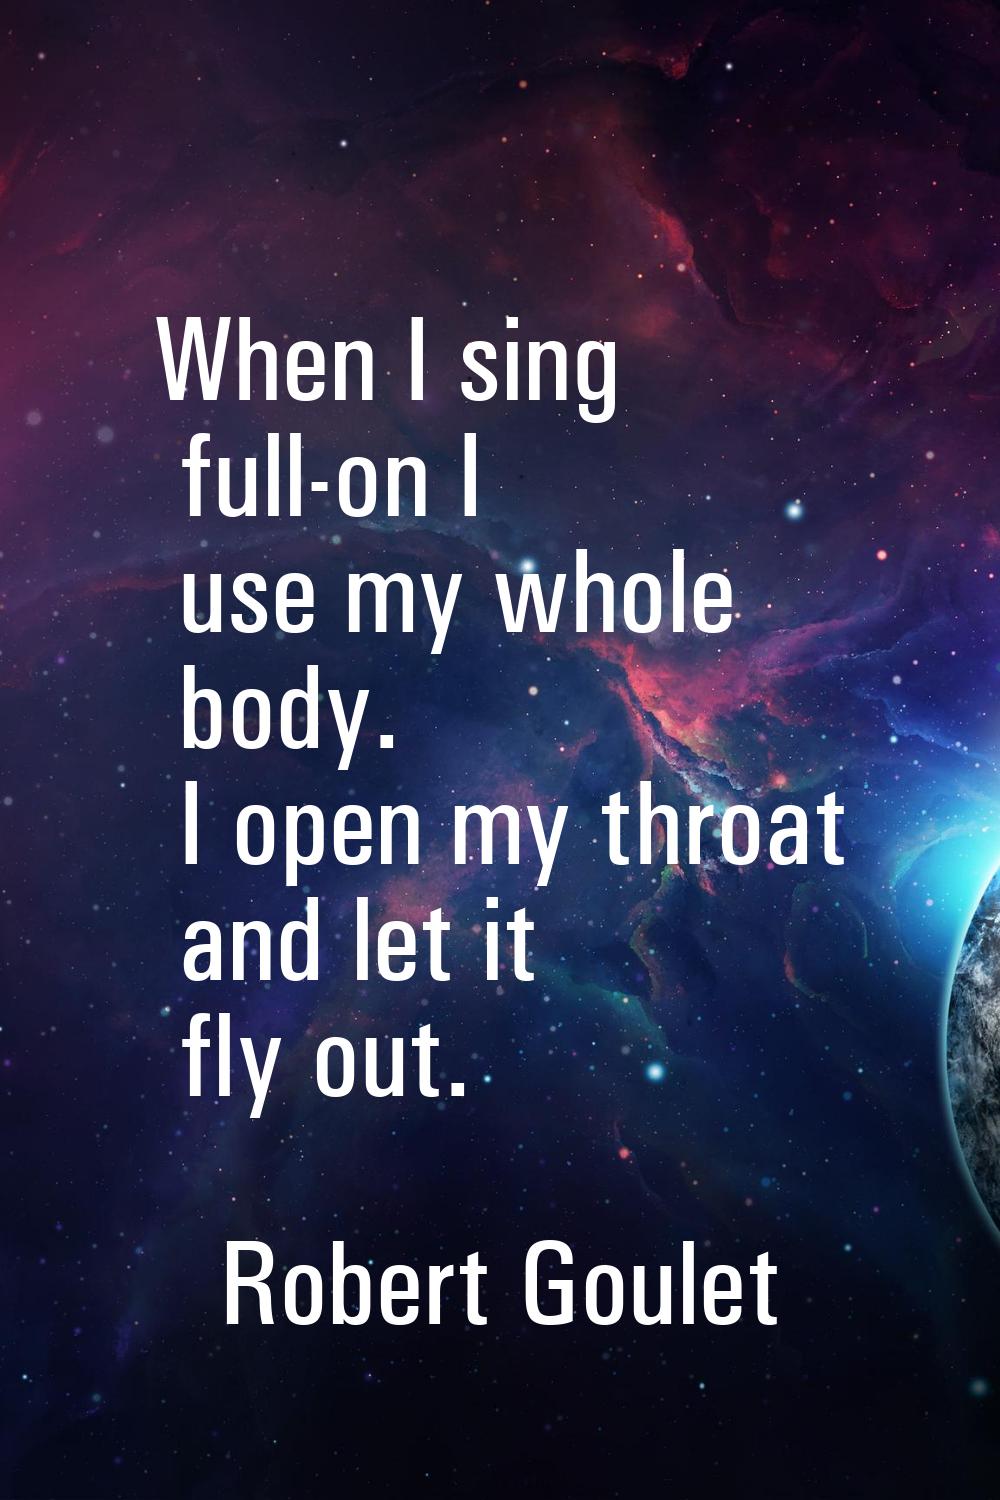 When I sing full-on I use my whole body. I open my throat and let it fly out.